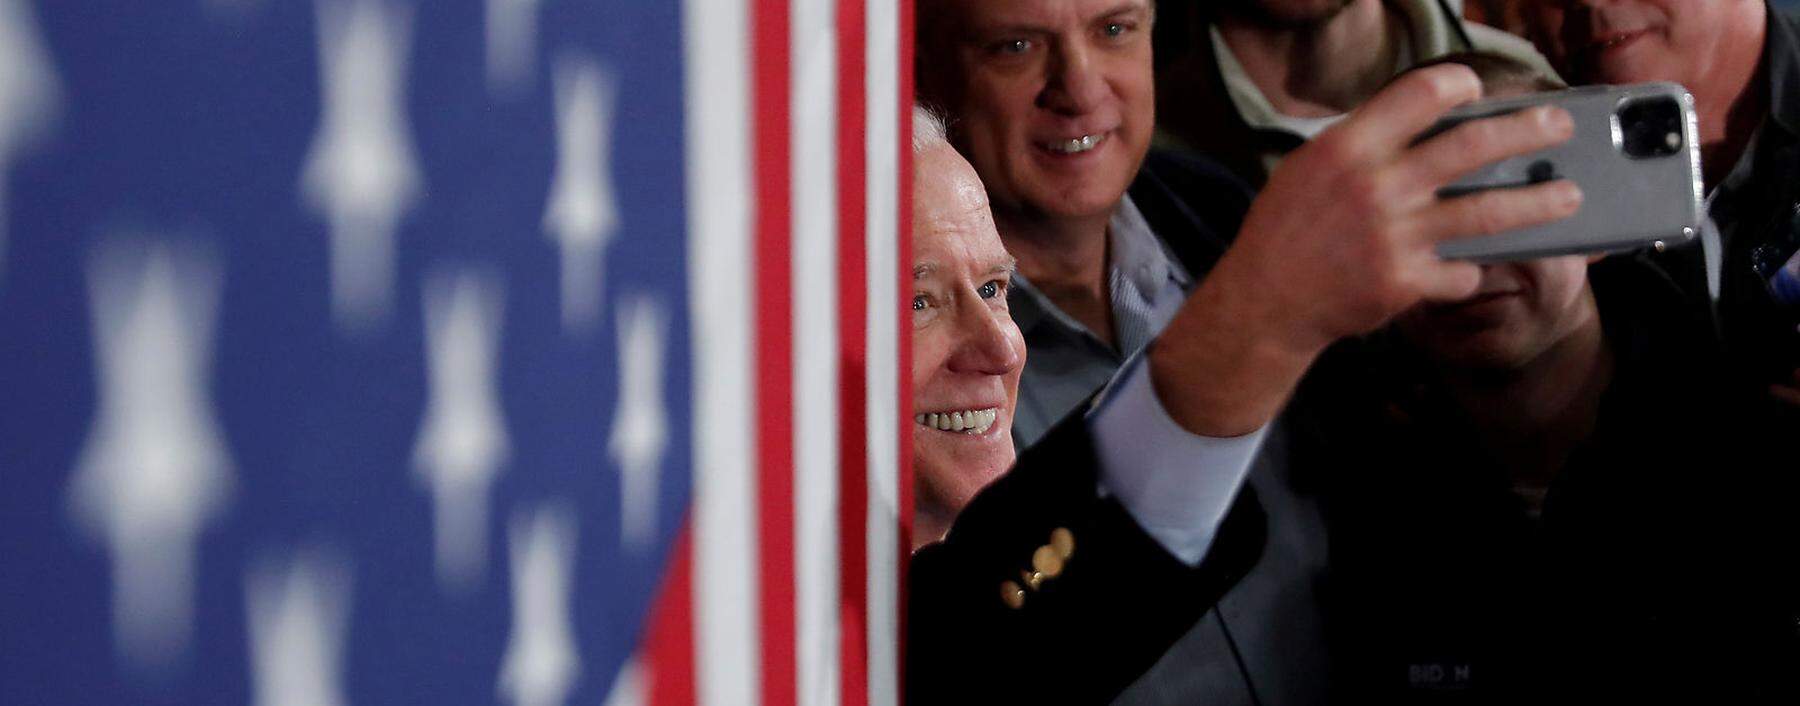 Biden poses for a pictures with supporters during a campaign event in Manchester, New Hampshire